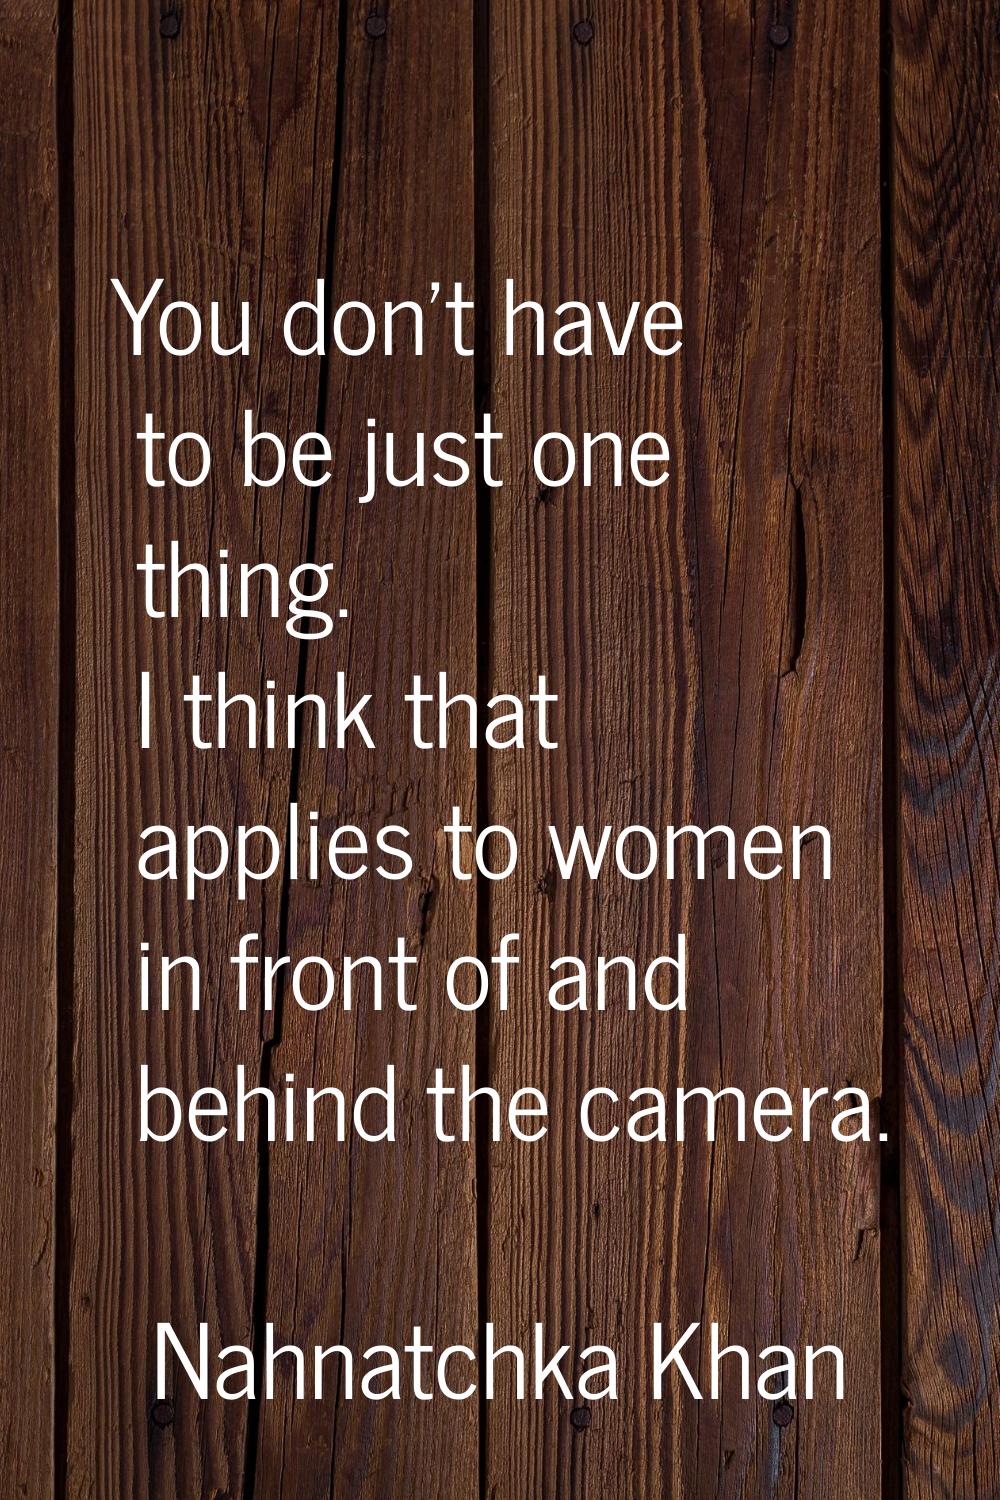 You don't have to be just one thing. I think that applies to women in front of and behind the camer